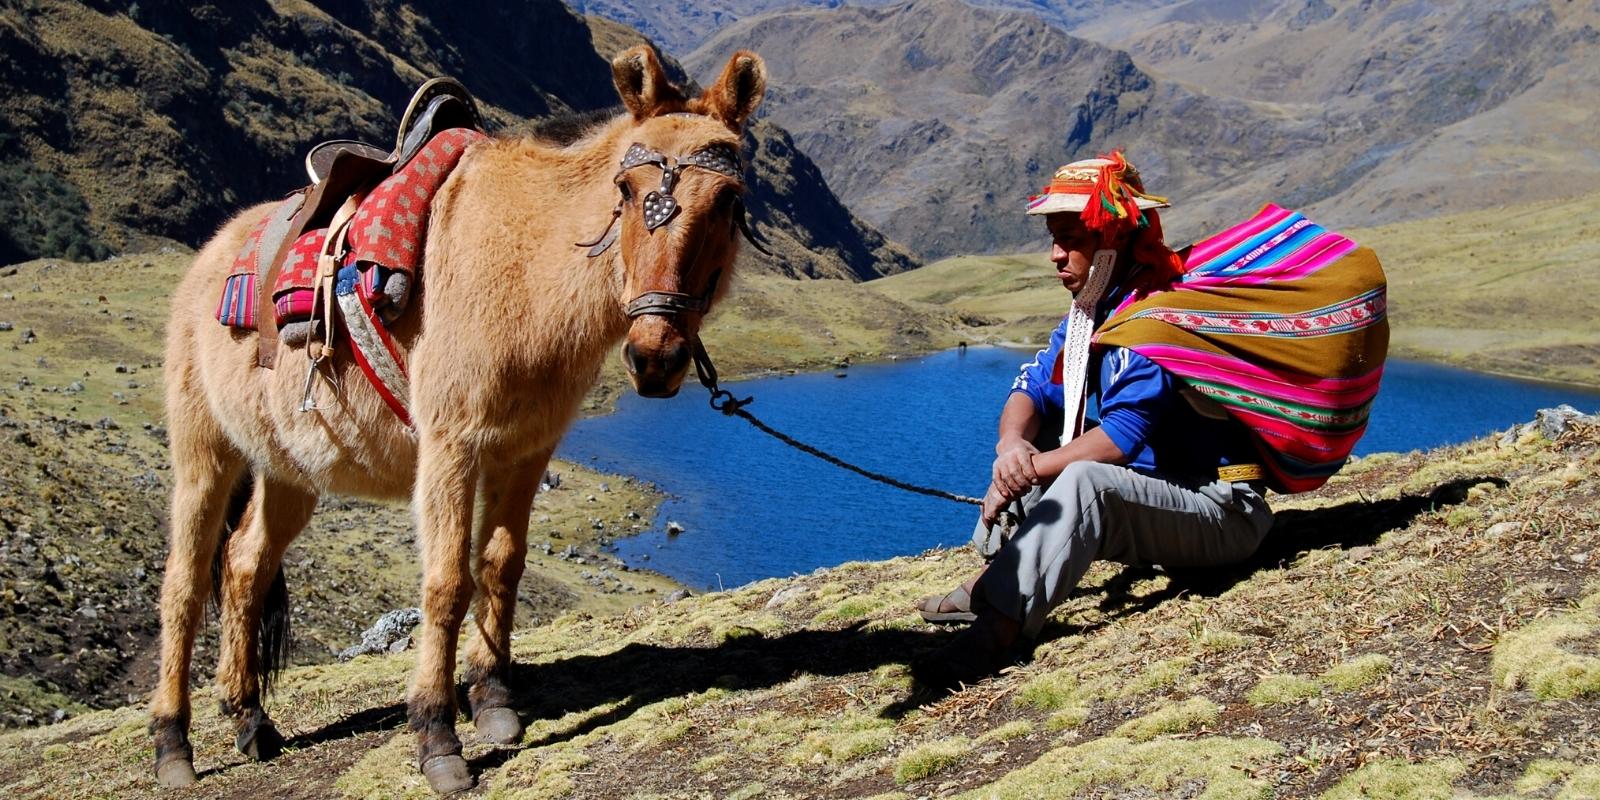 WHO ARE THE COOKS AND MULETEERS IN THE LARES TREK?